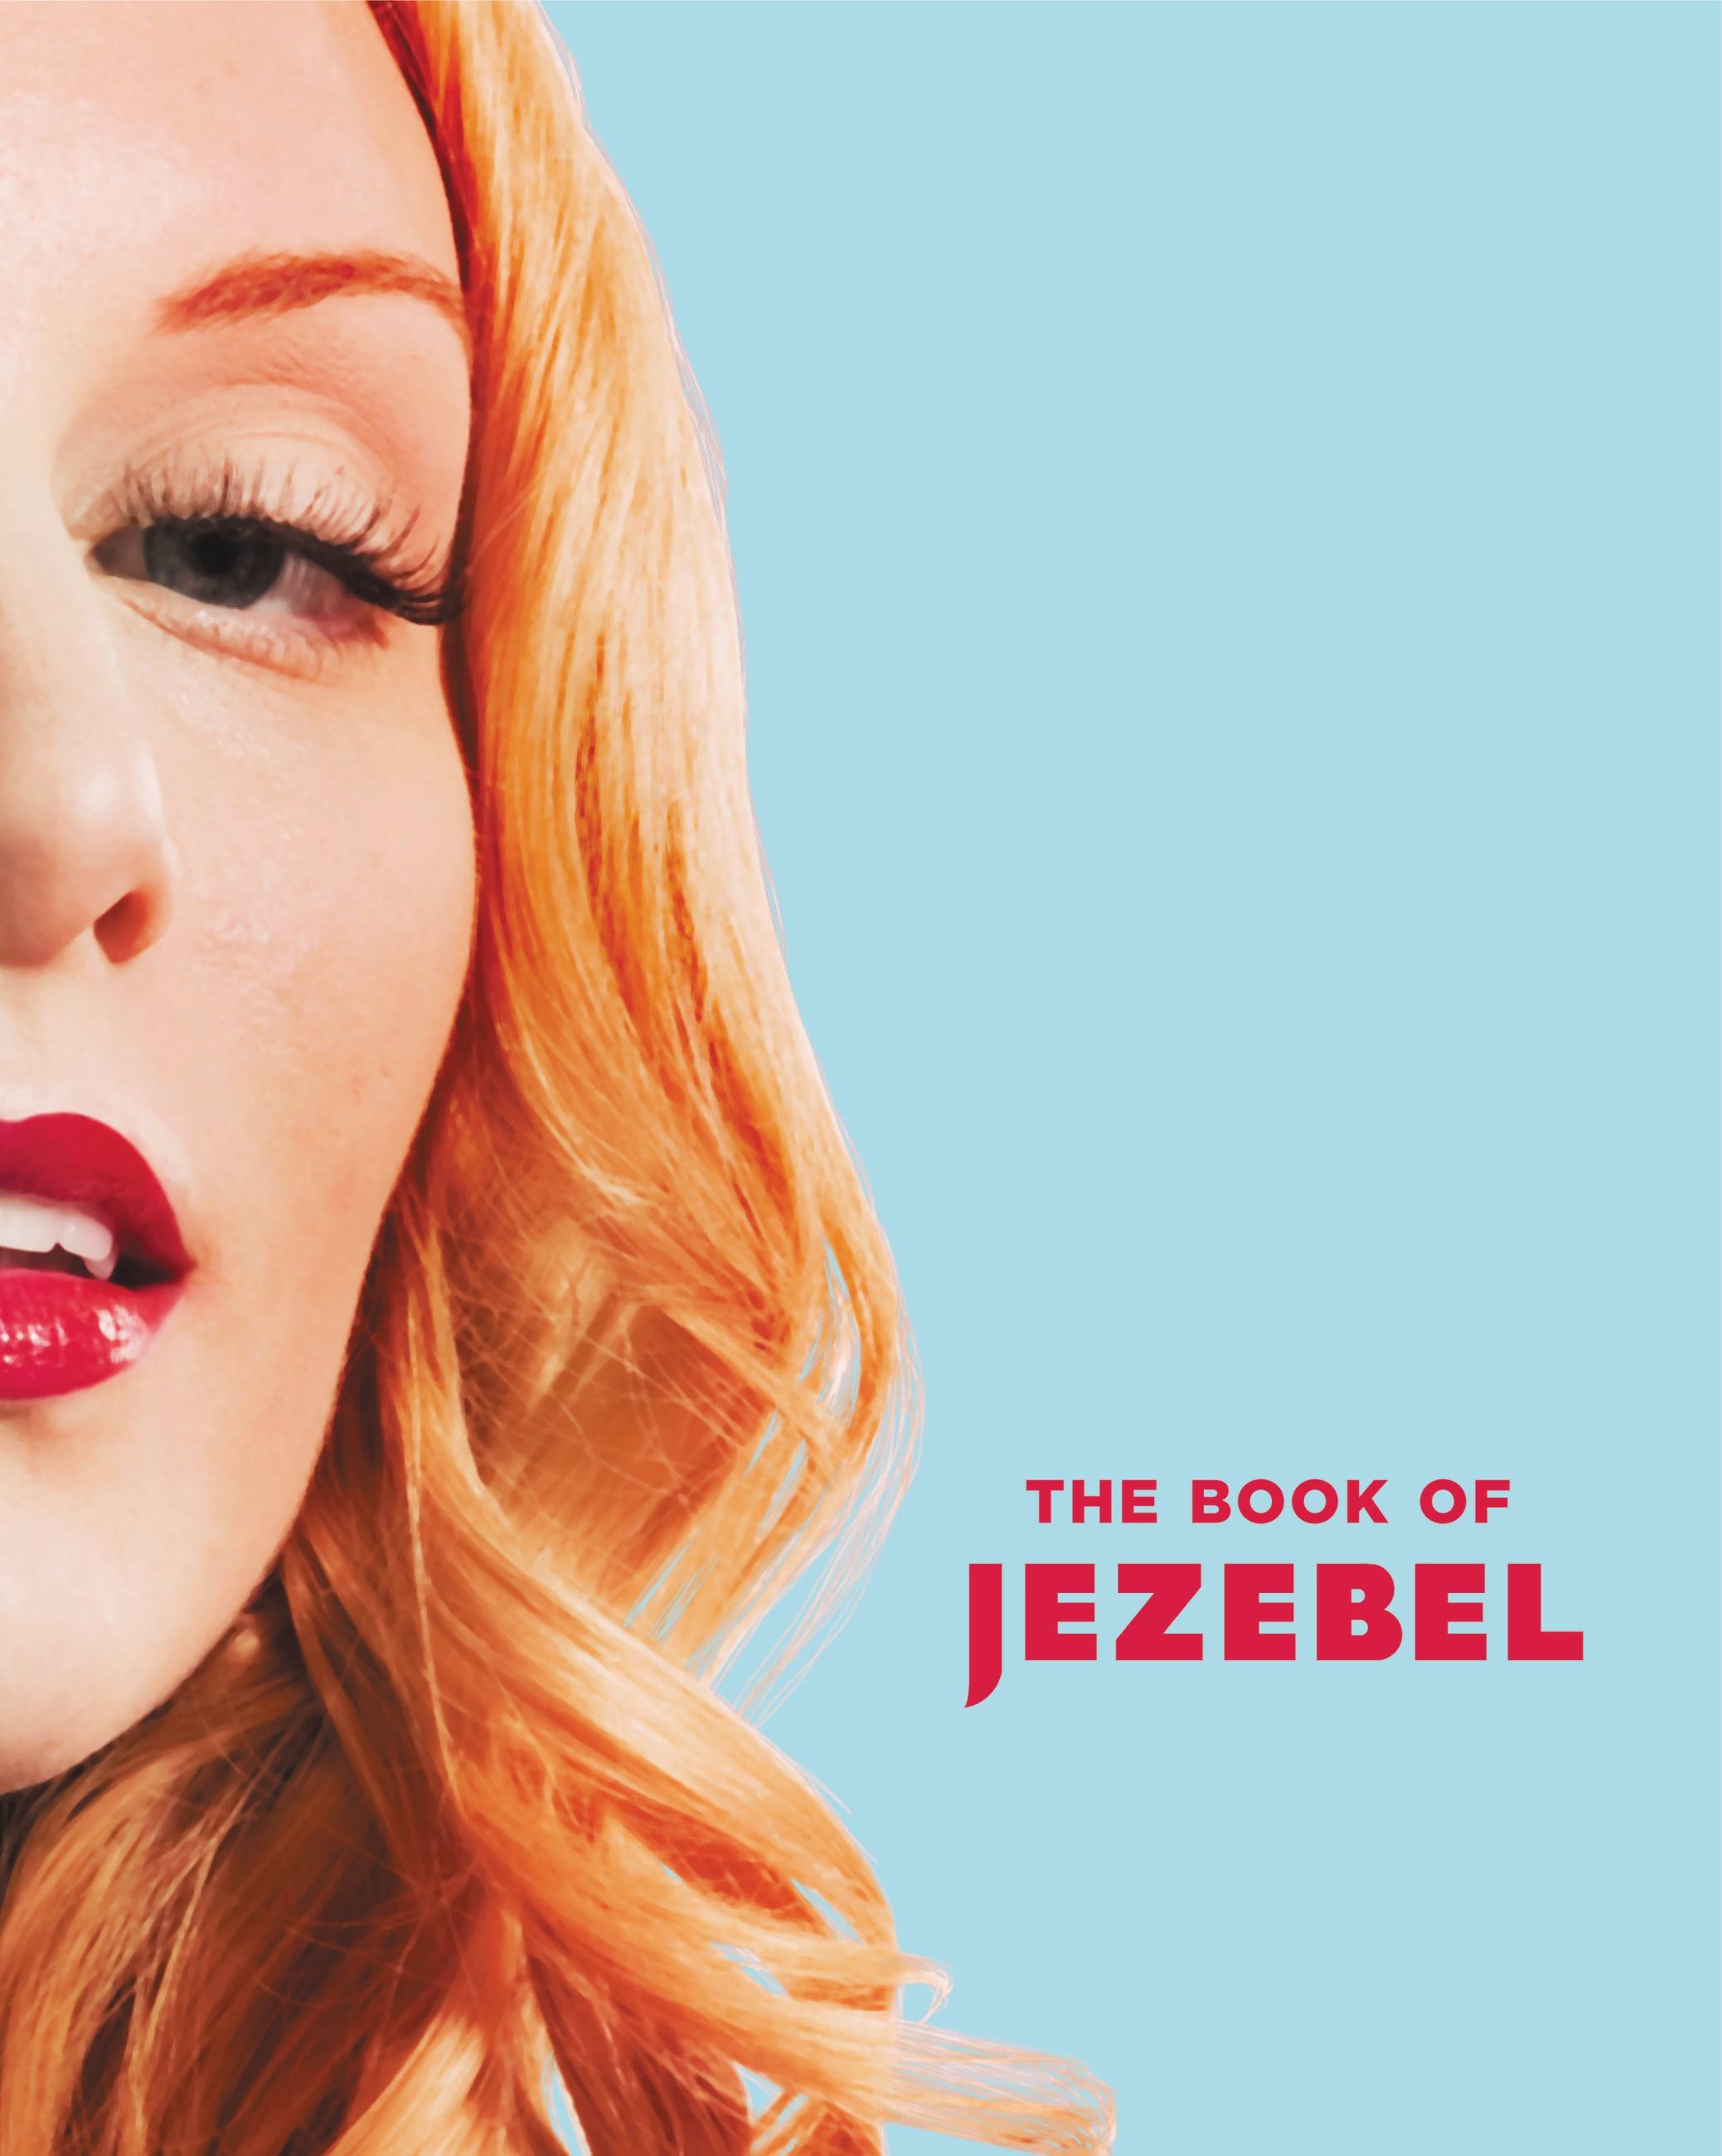 The Book of Jezebel by Anna Holmes | Hachette Book Group